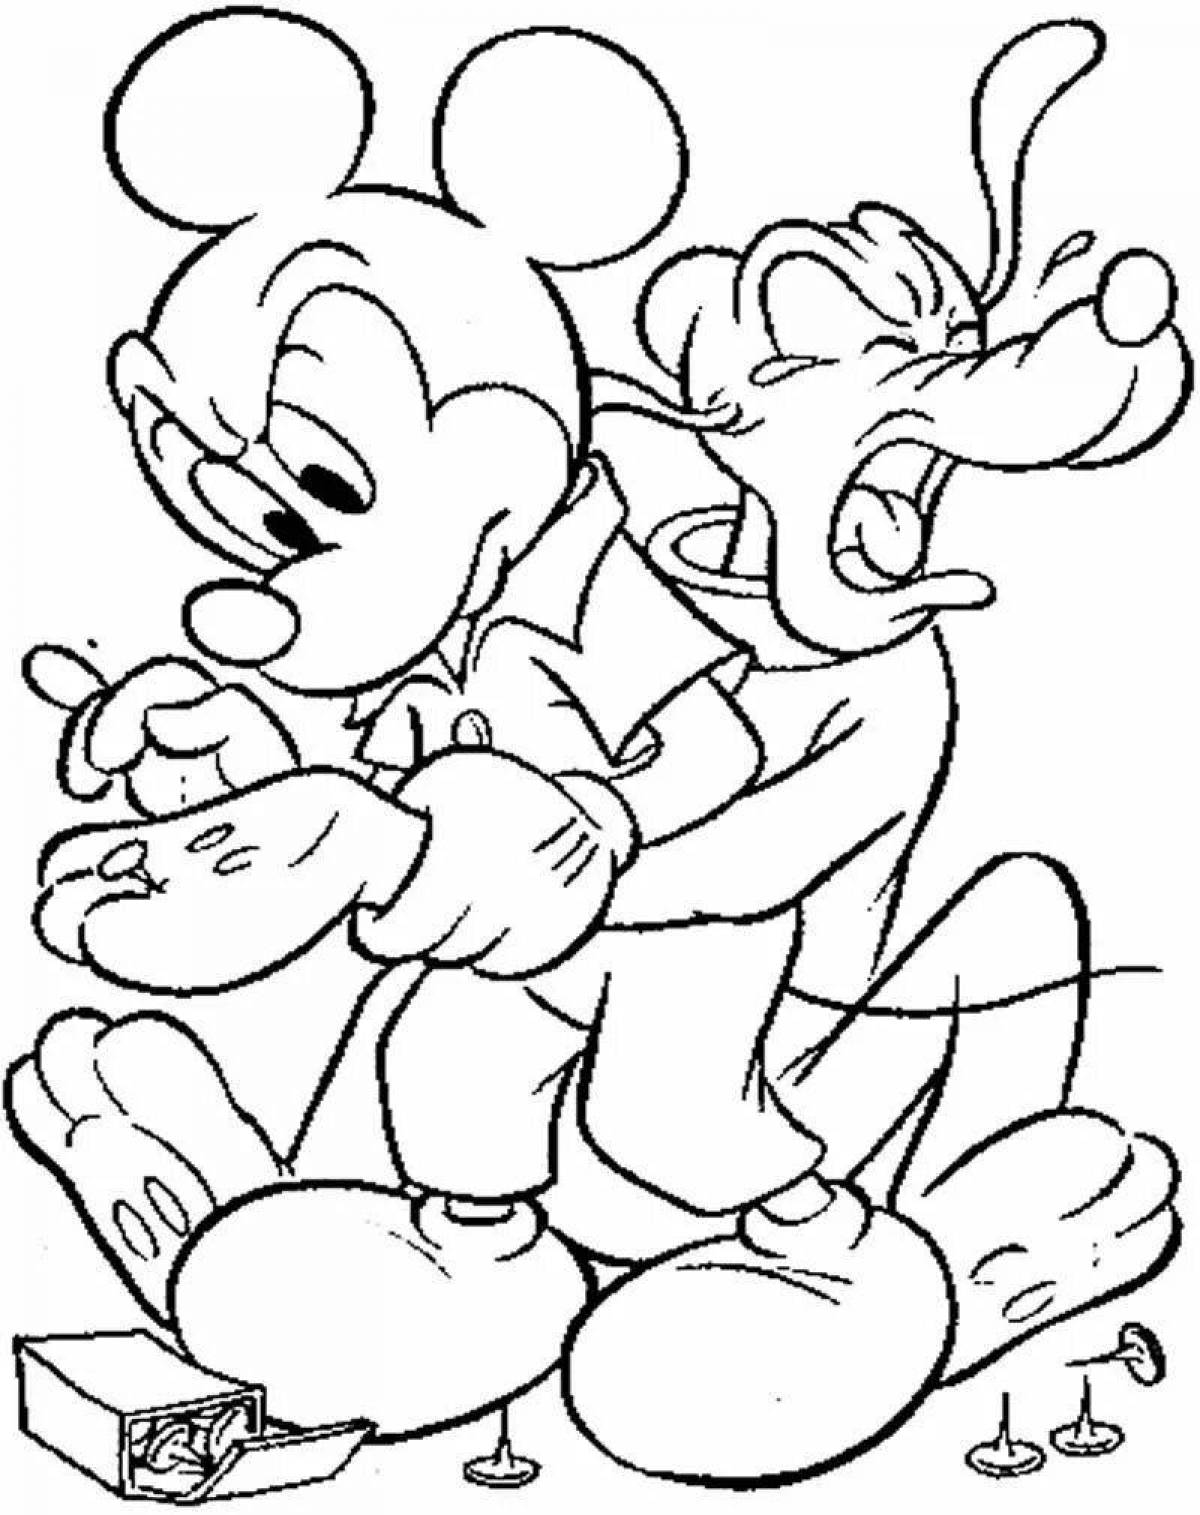 Delightful mickey mouse coloring book